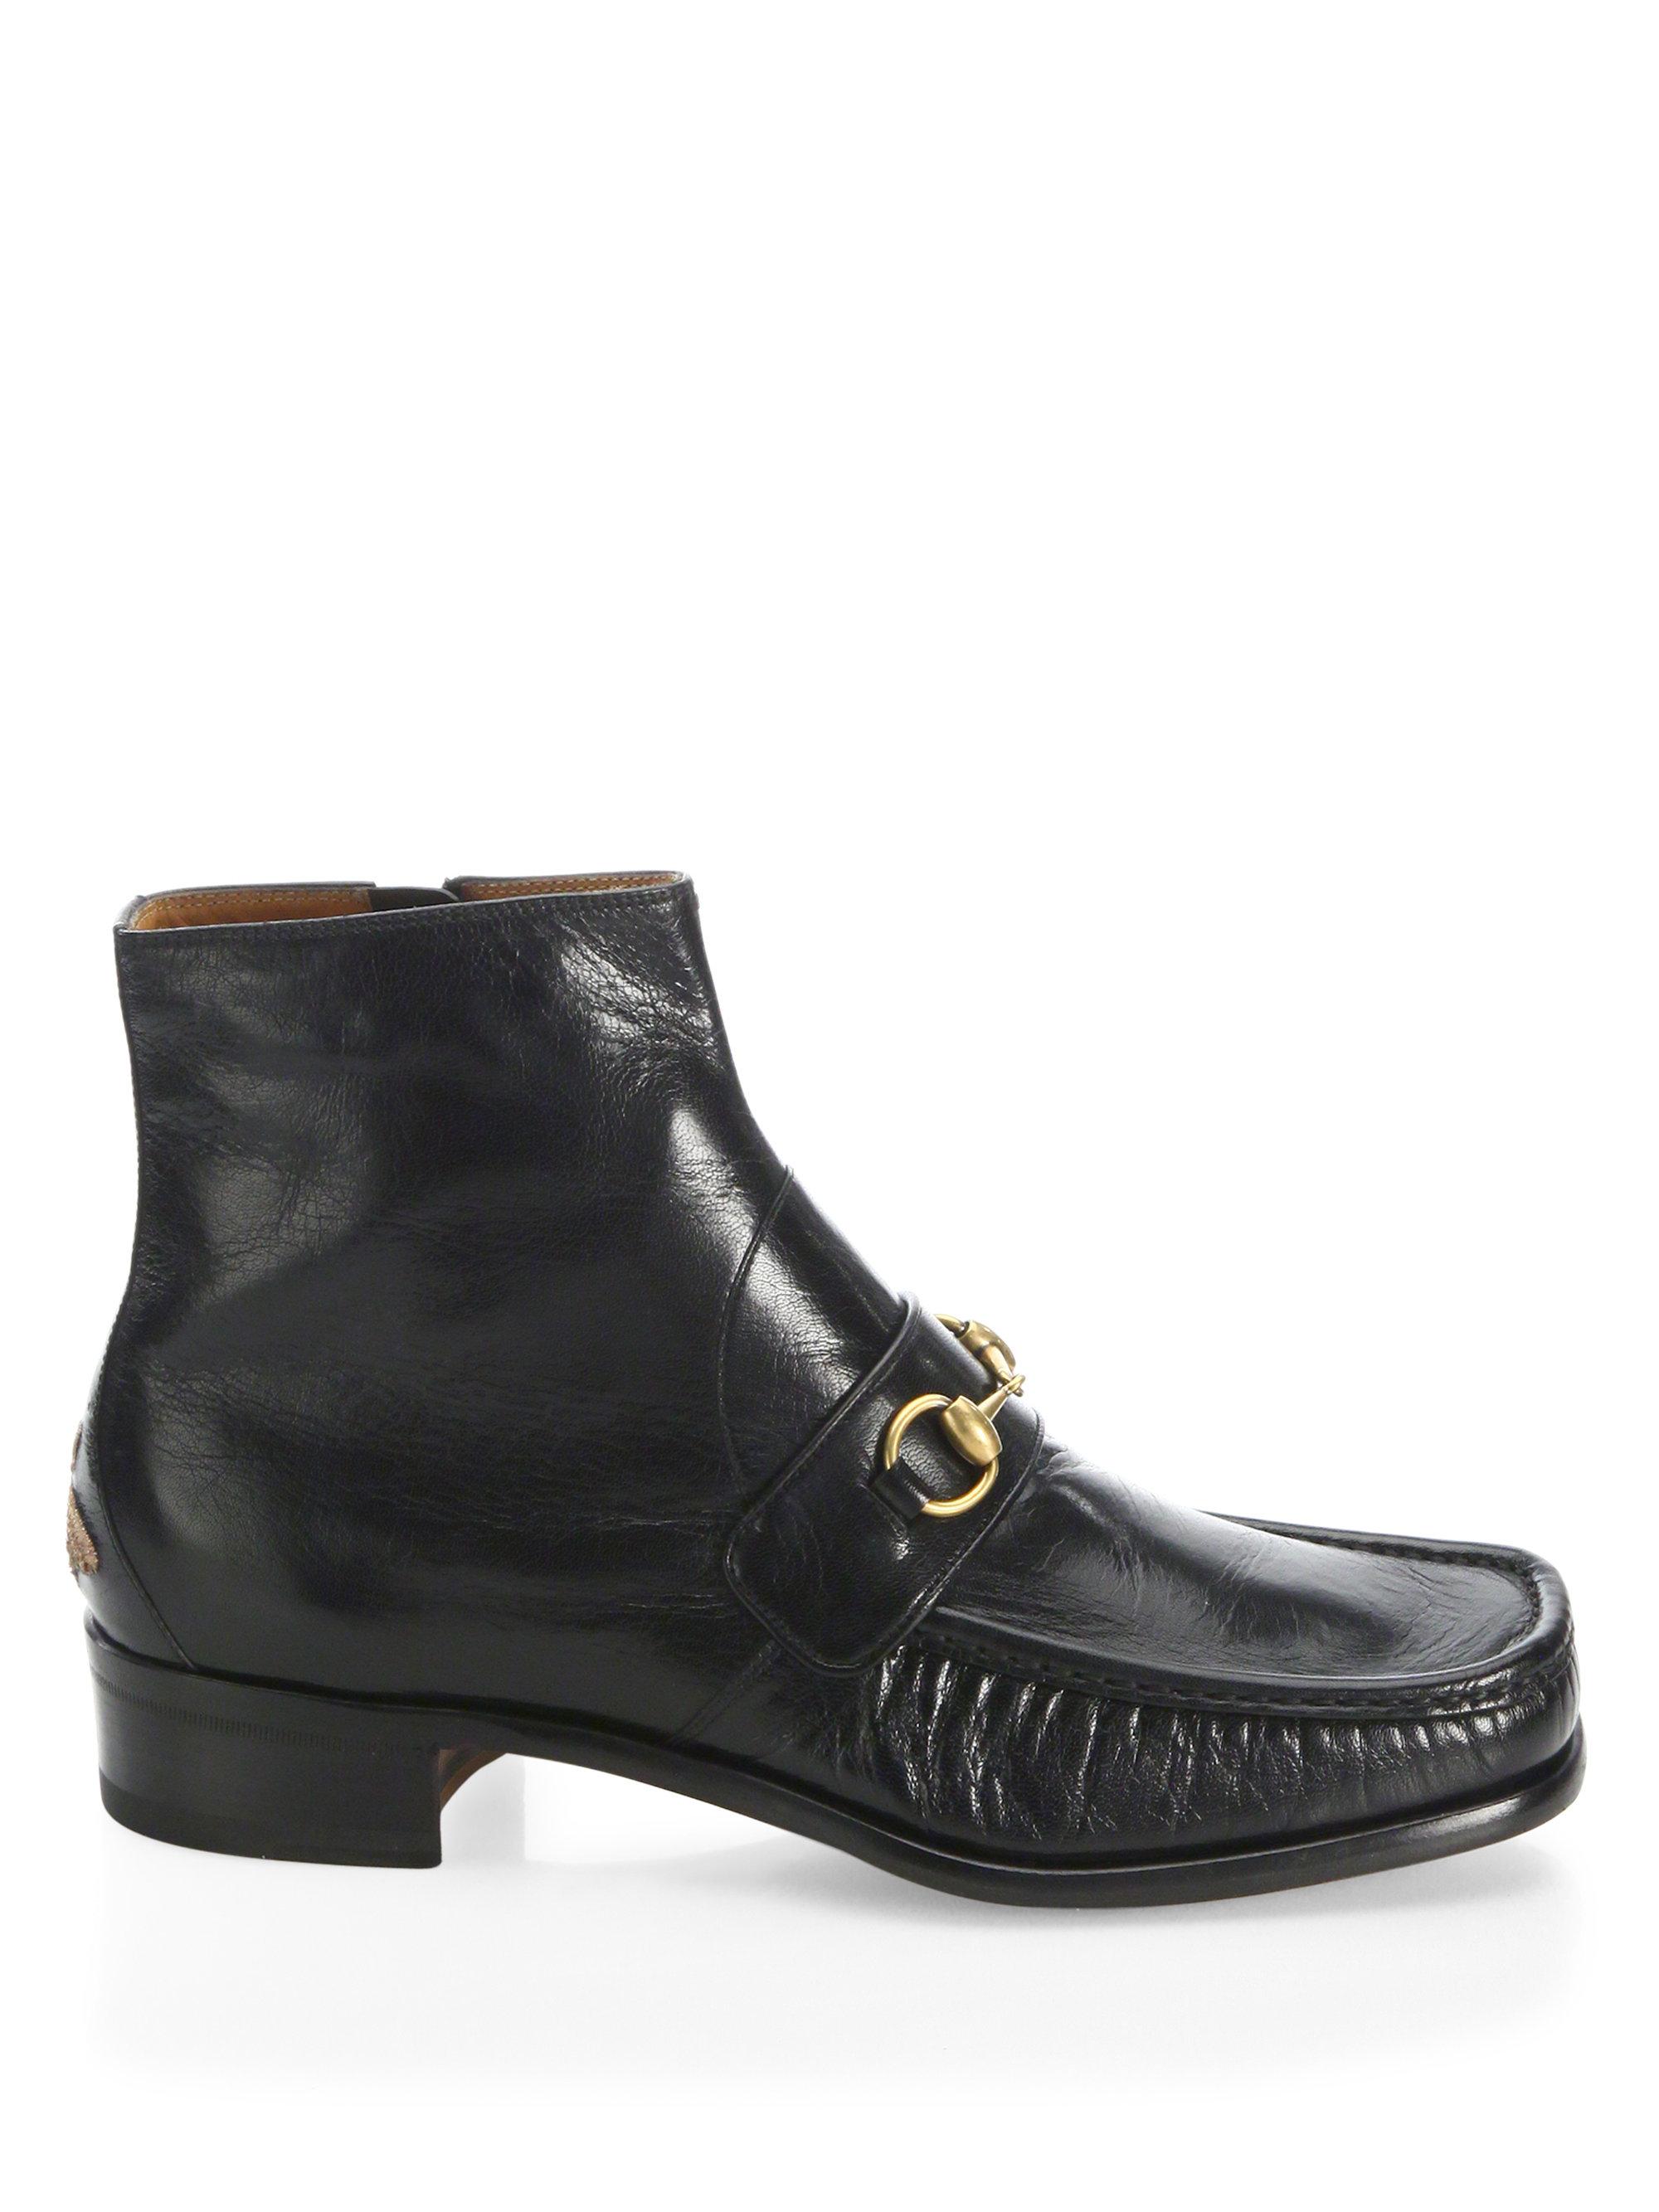 Gucci Horsebit Leather Ankle Boots in Black | Lyst